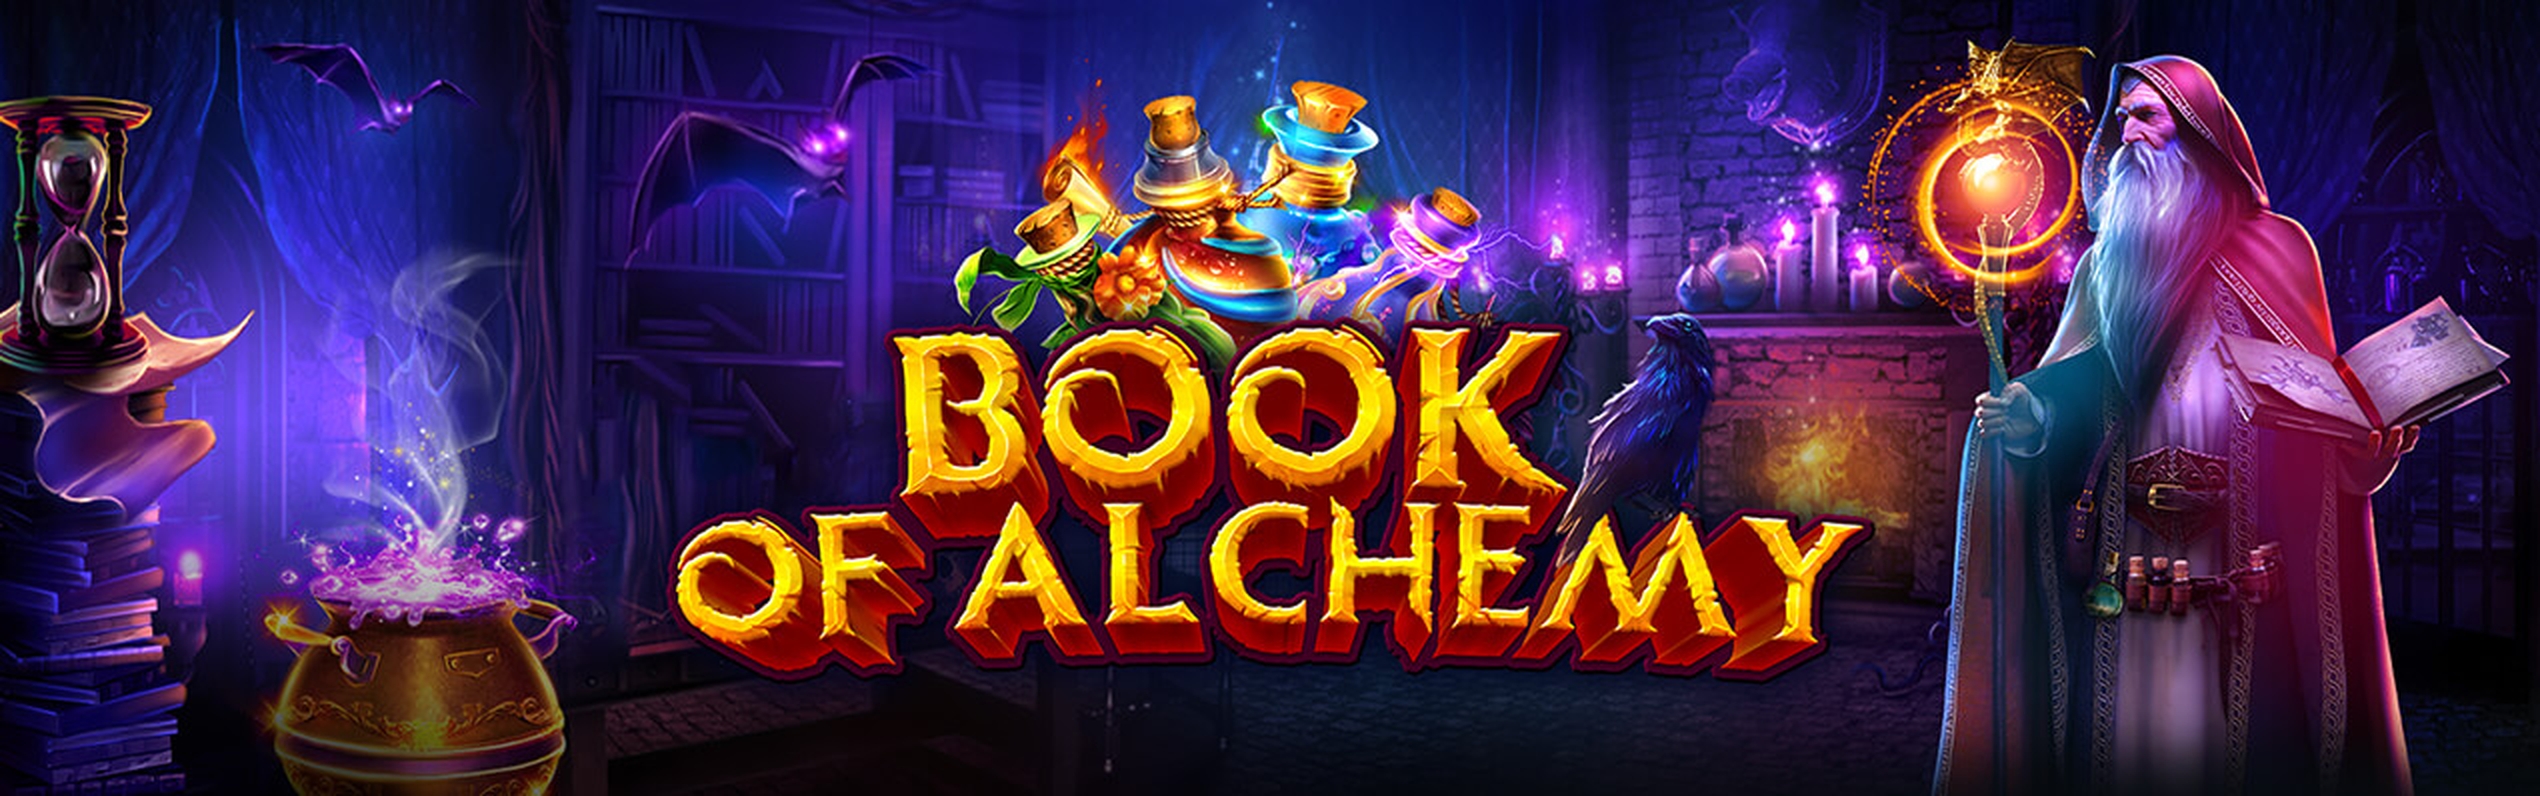 The Book of Alchemy Online Slot Demo Game by GameArt